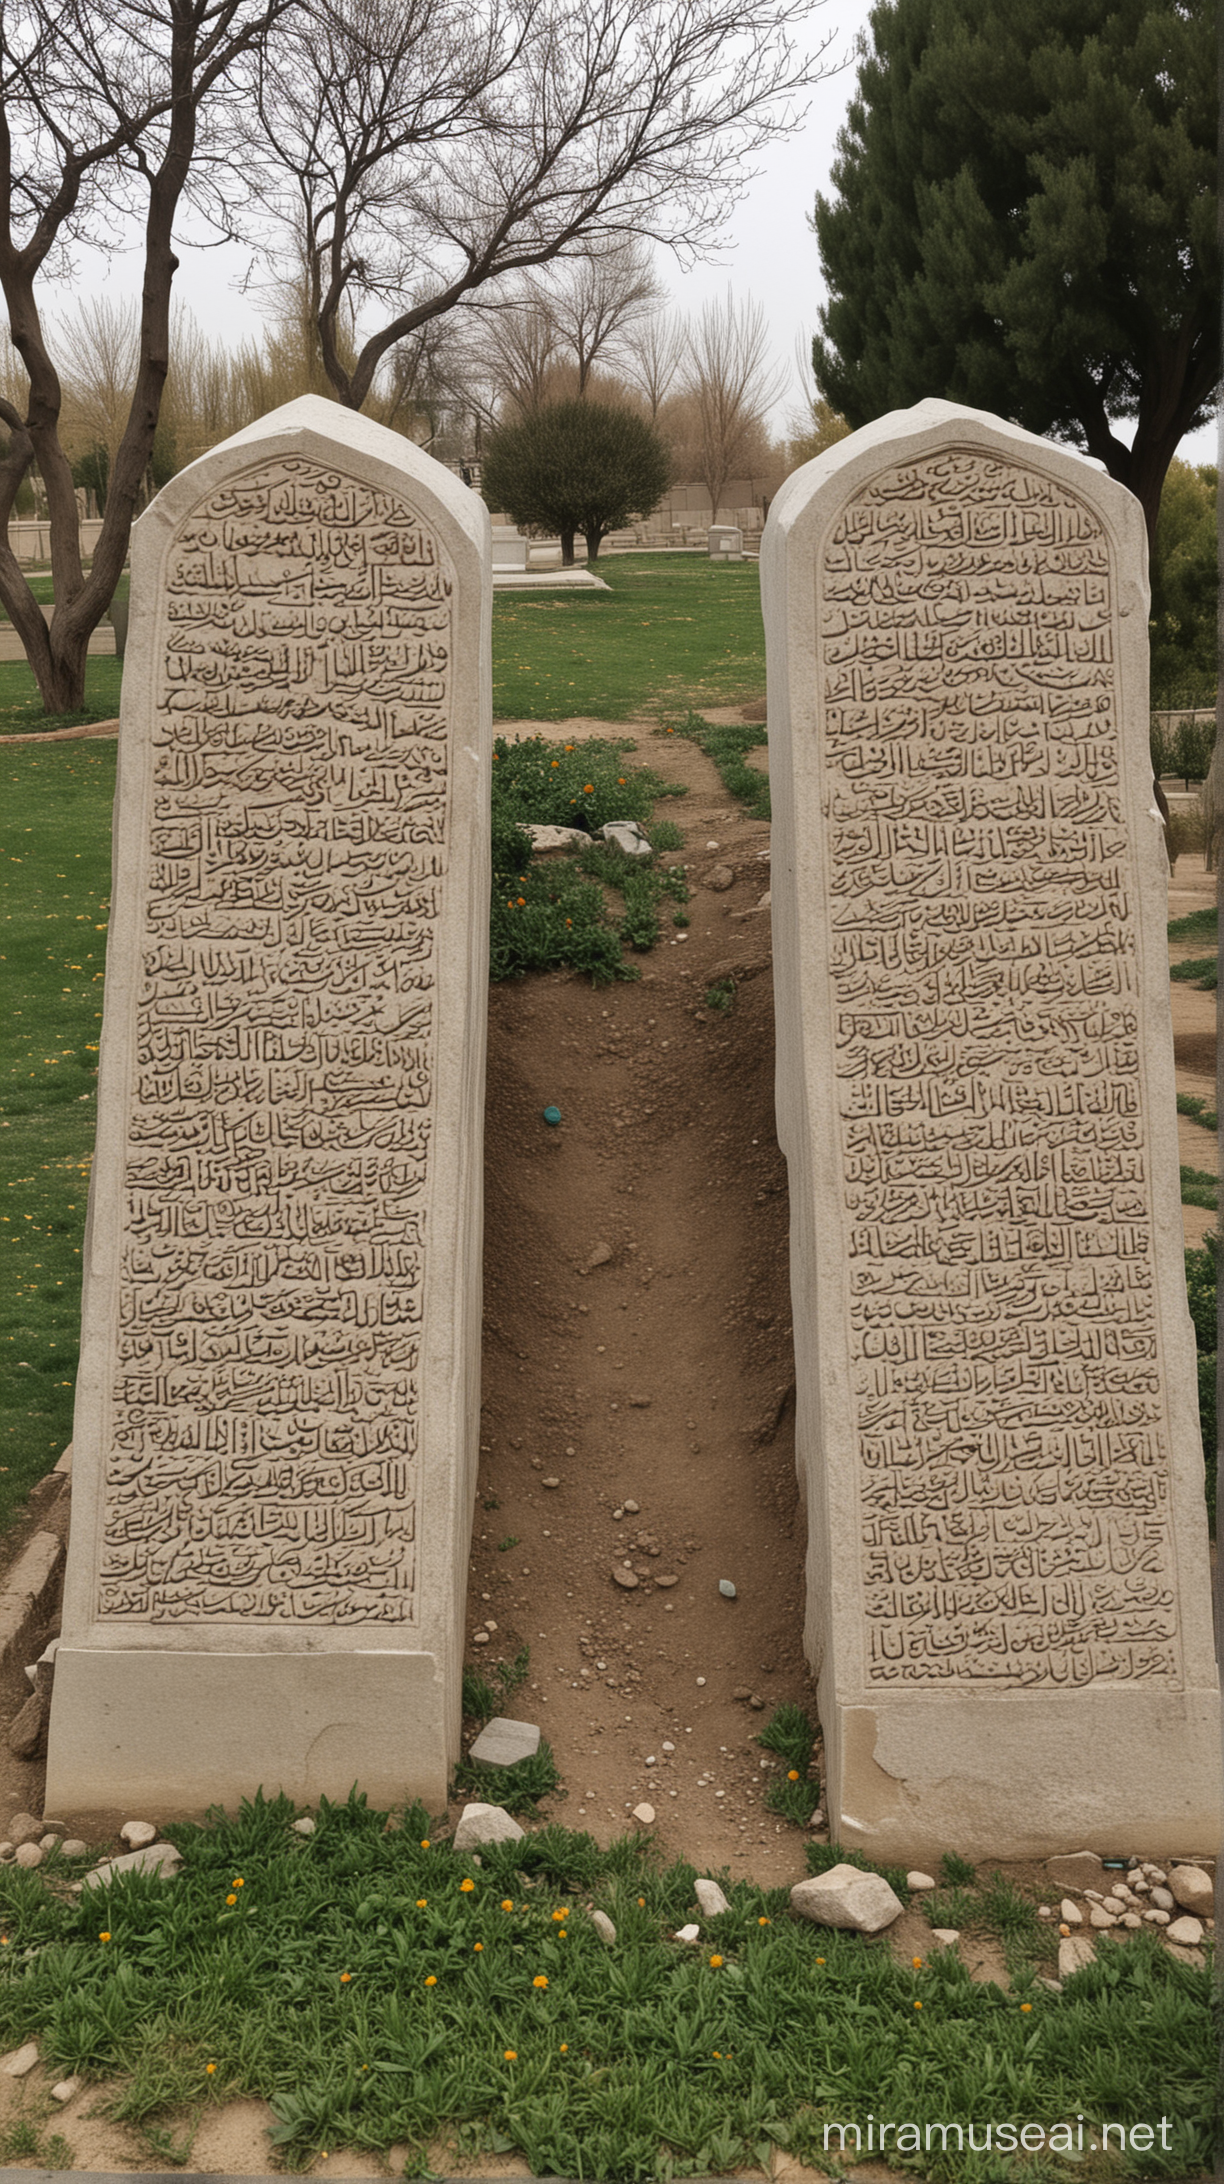 Three Graves in the Majestic Era of Safavid Dynasty